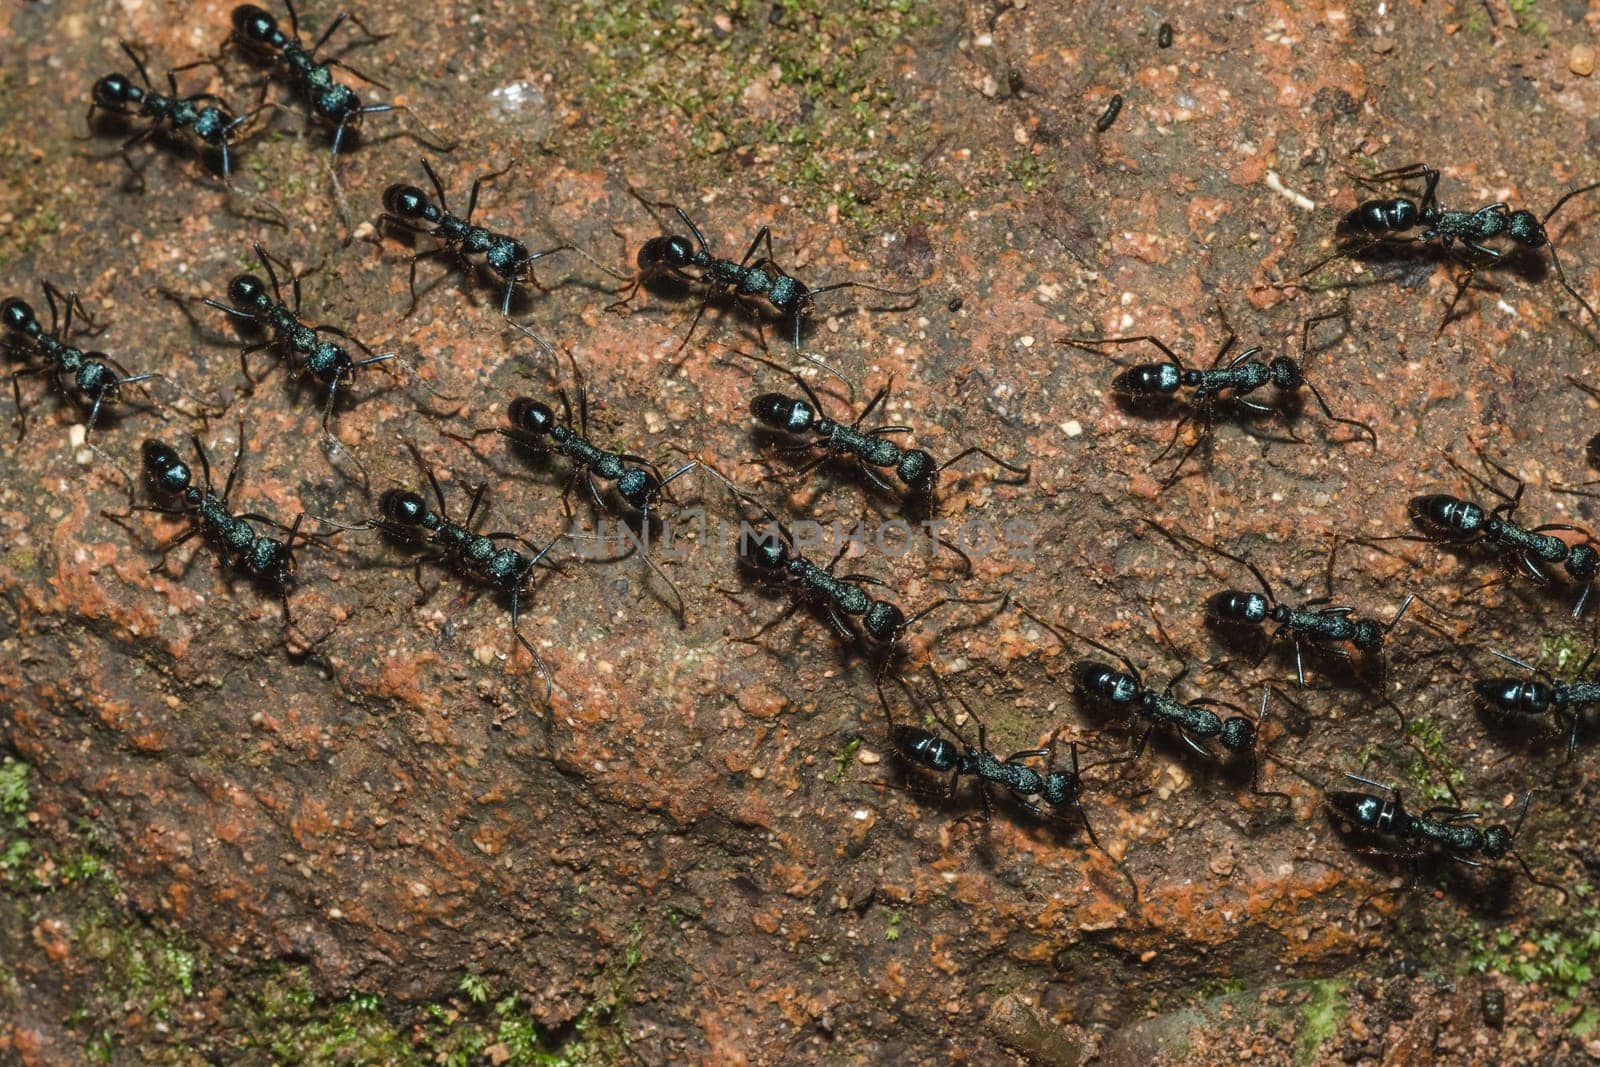 Black ant on the ground carrying food into the nest.